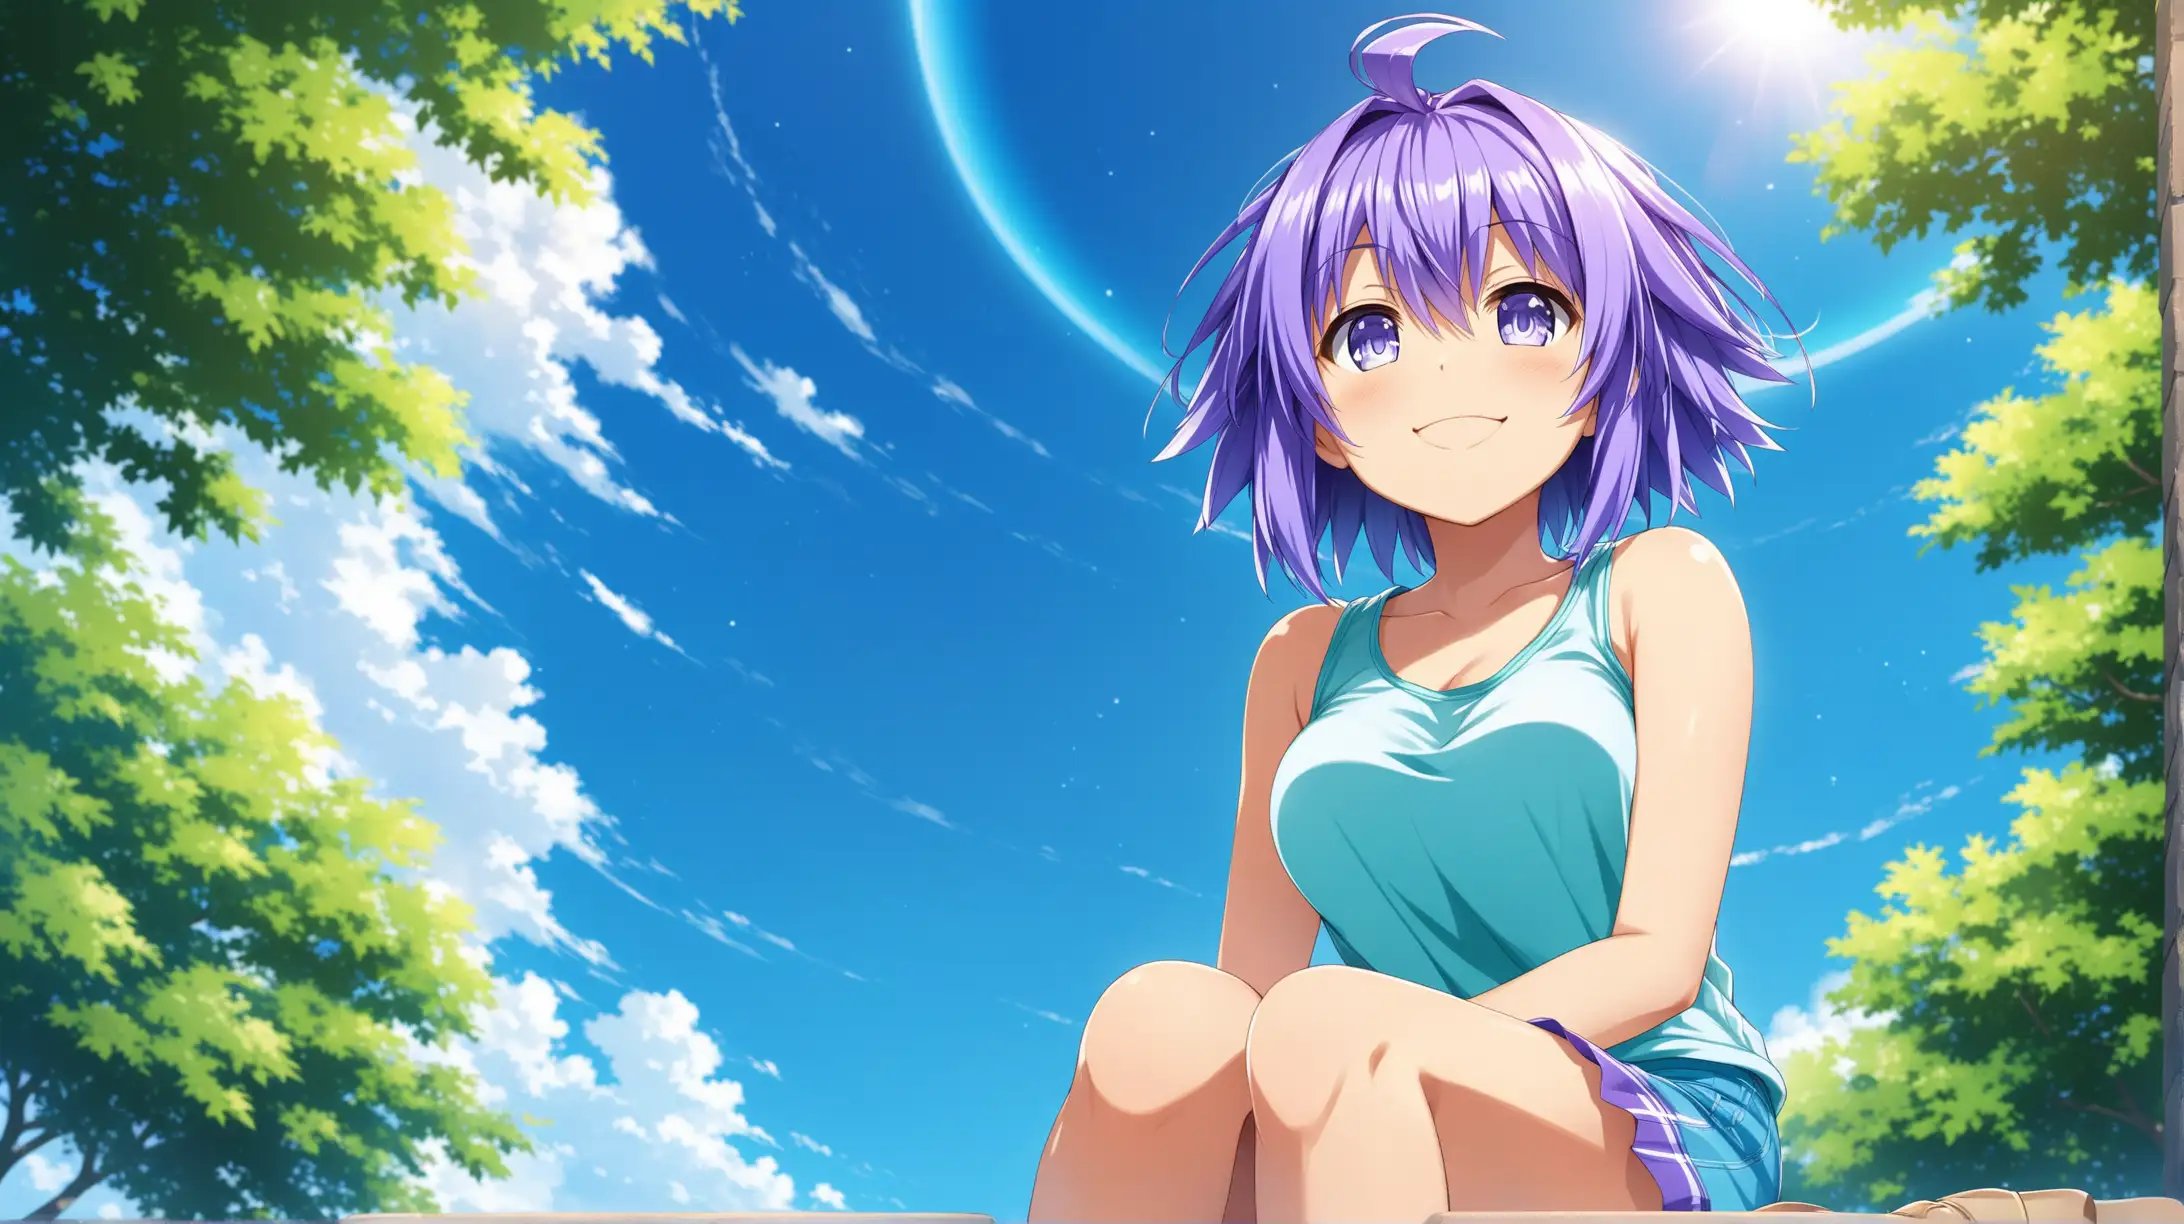 Draw the character Neptune from Hyperdimension Neptunia, short hair, high quality, natural lighting, long shot, outdoors, low angle, sitting, looking up at the sky, wearing a casual outfit, smiling